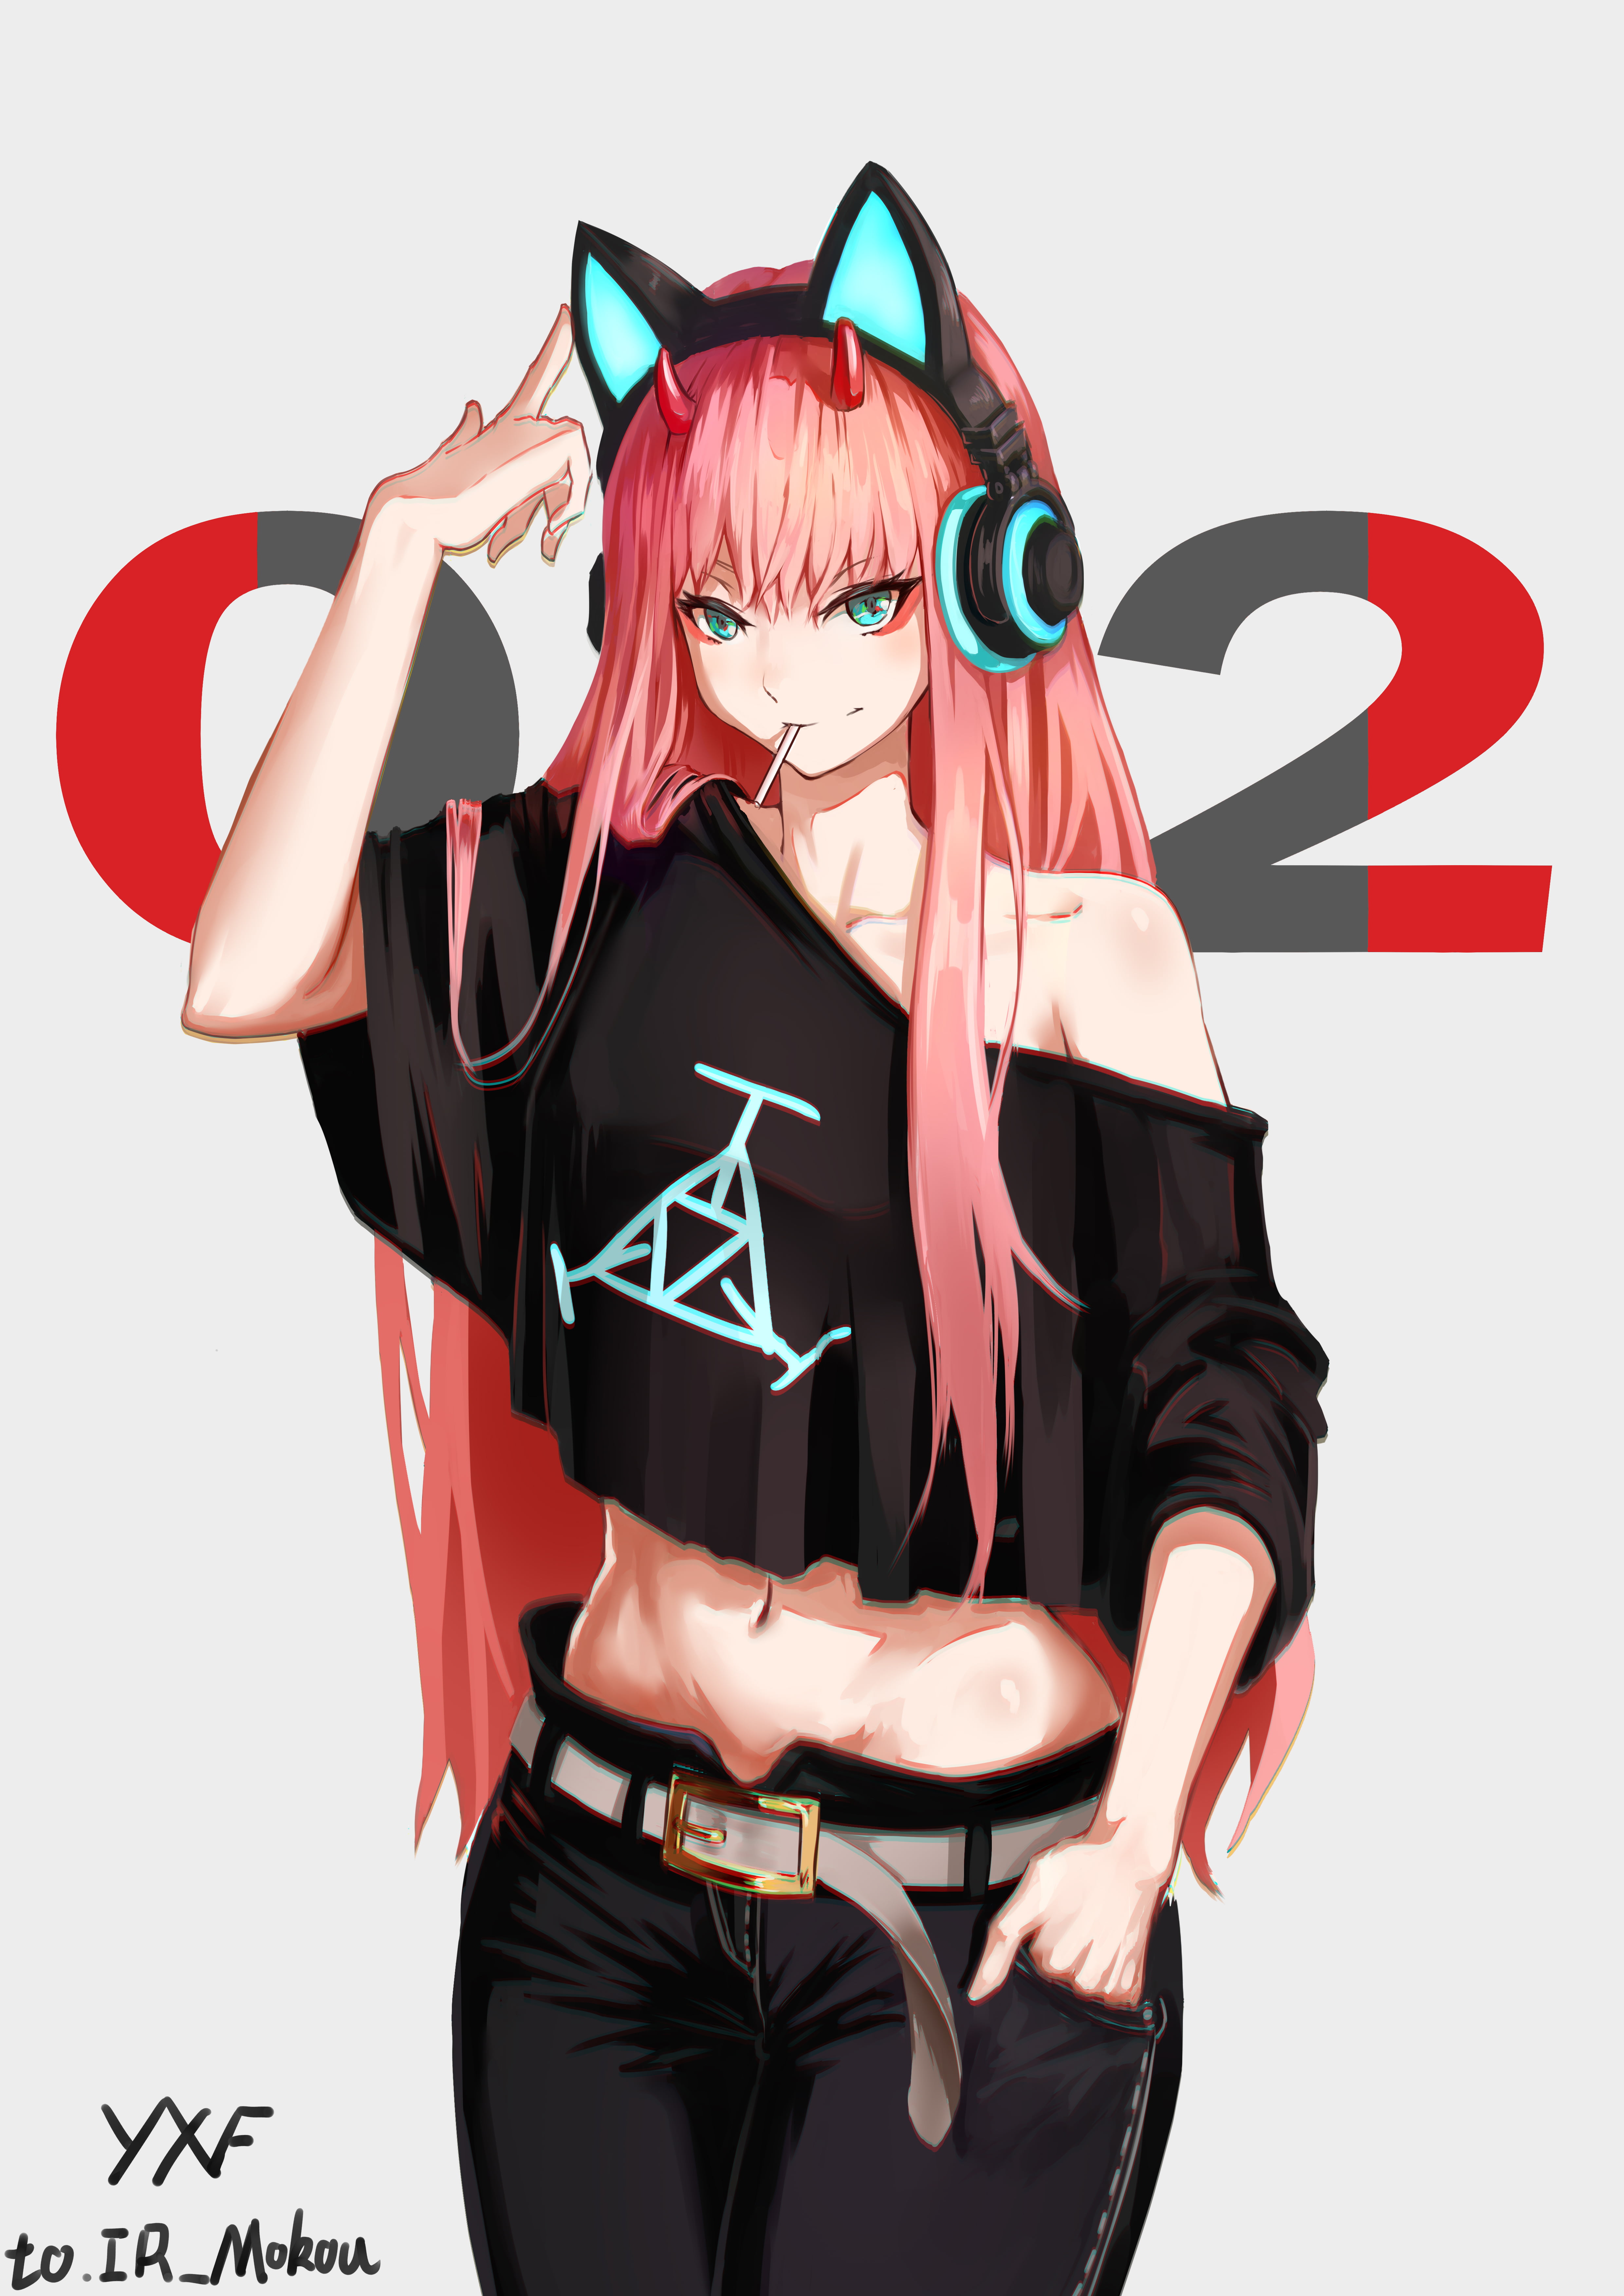 long pink haired female anime character illustration, white background, simple background, Zero Two (Darling in the FranXX), animal ears